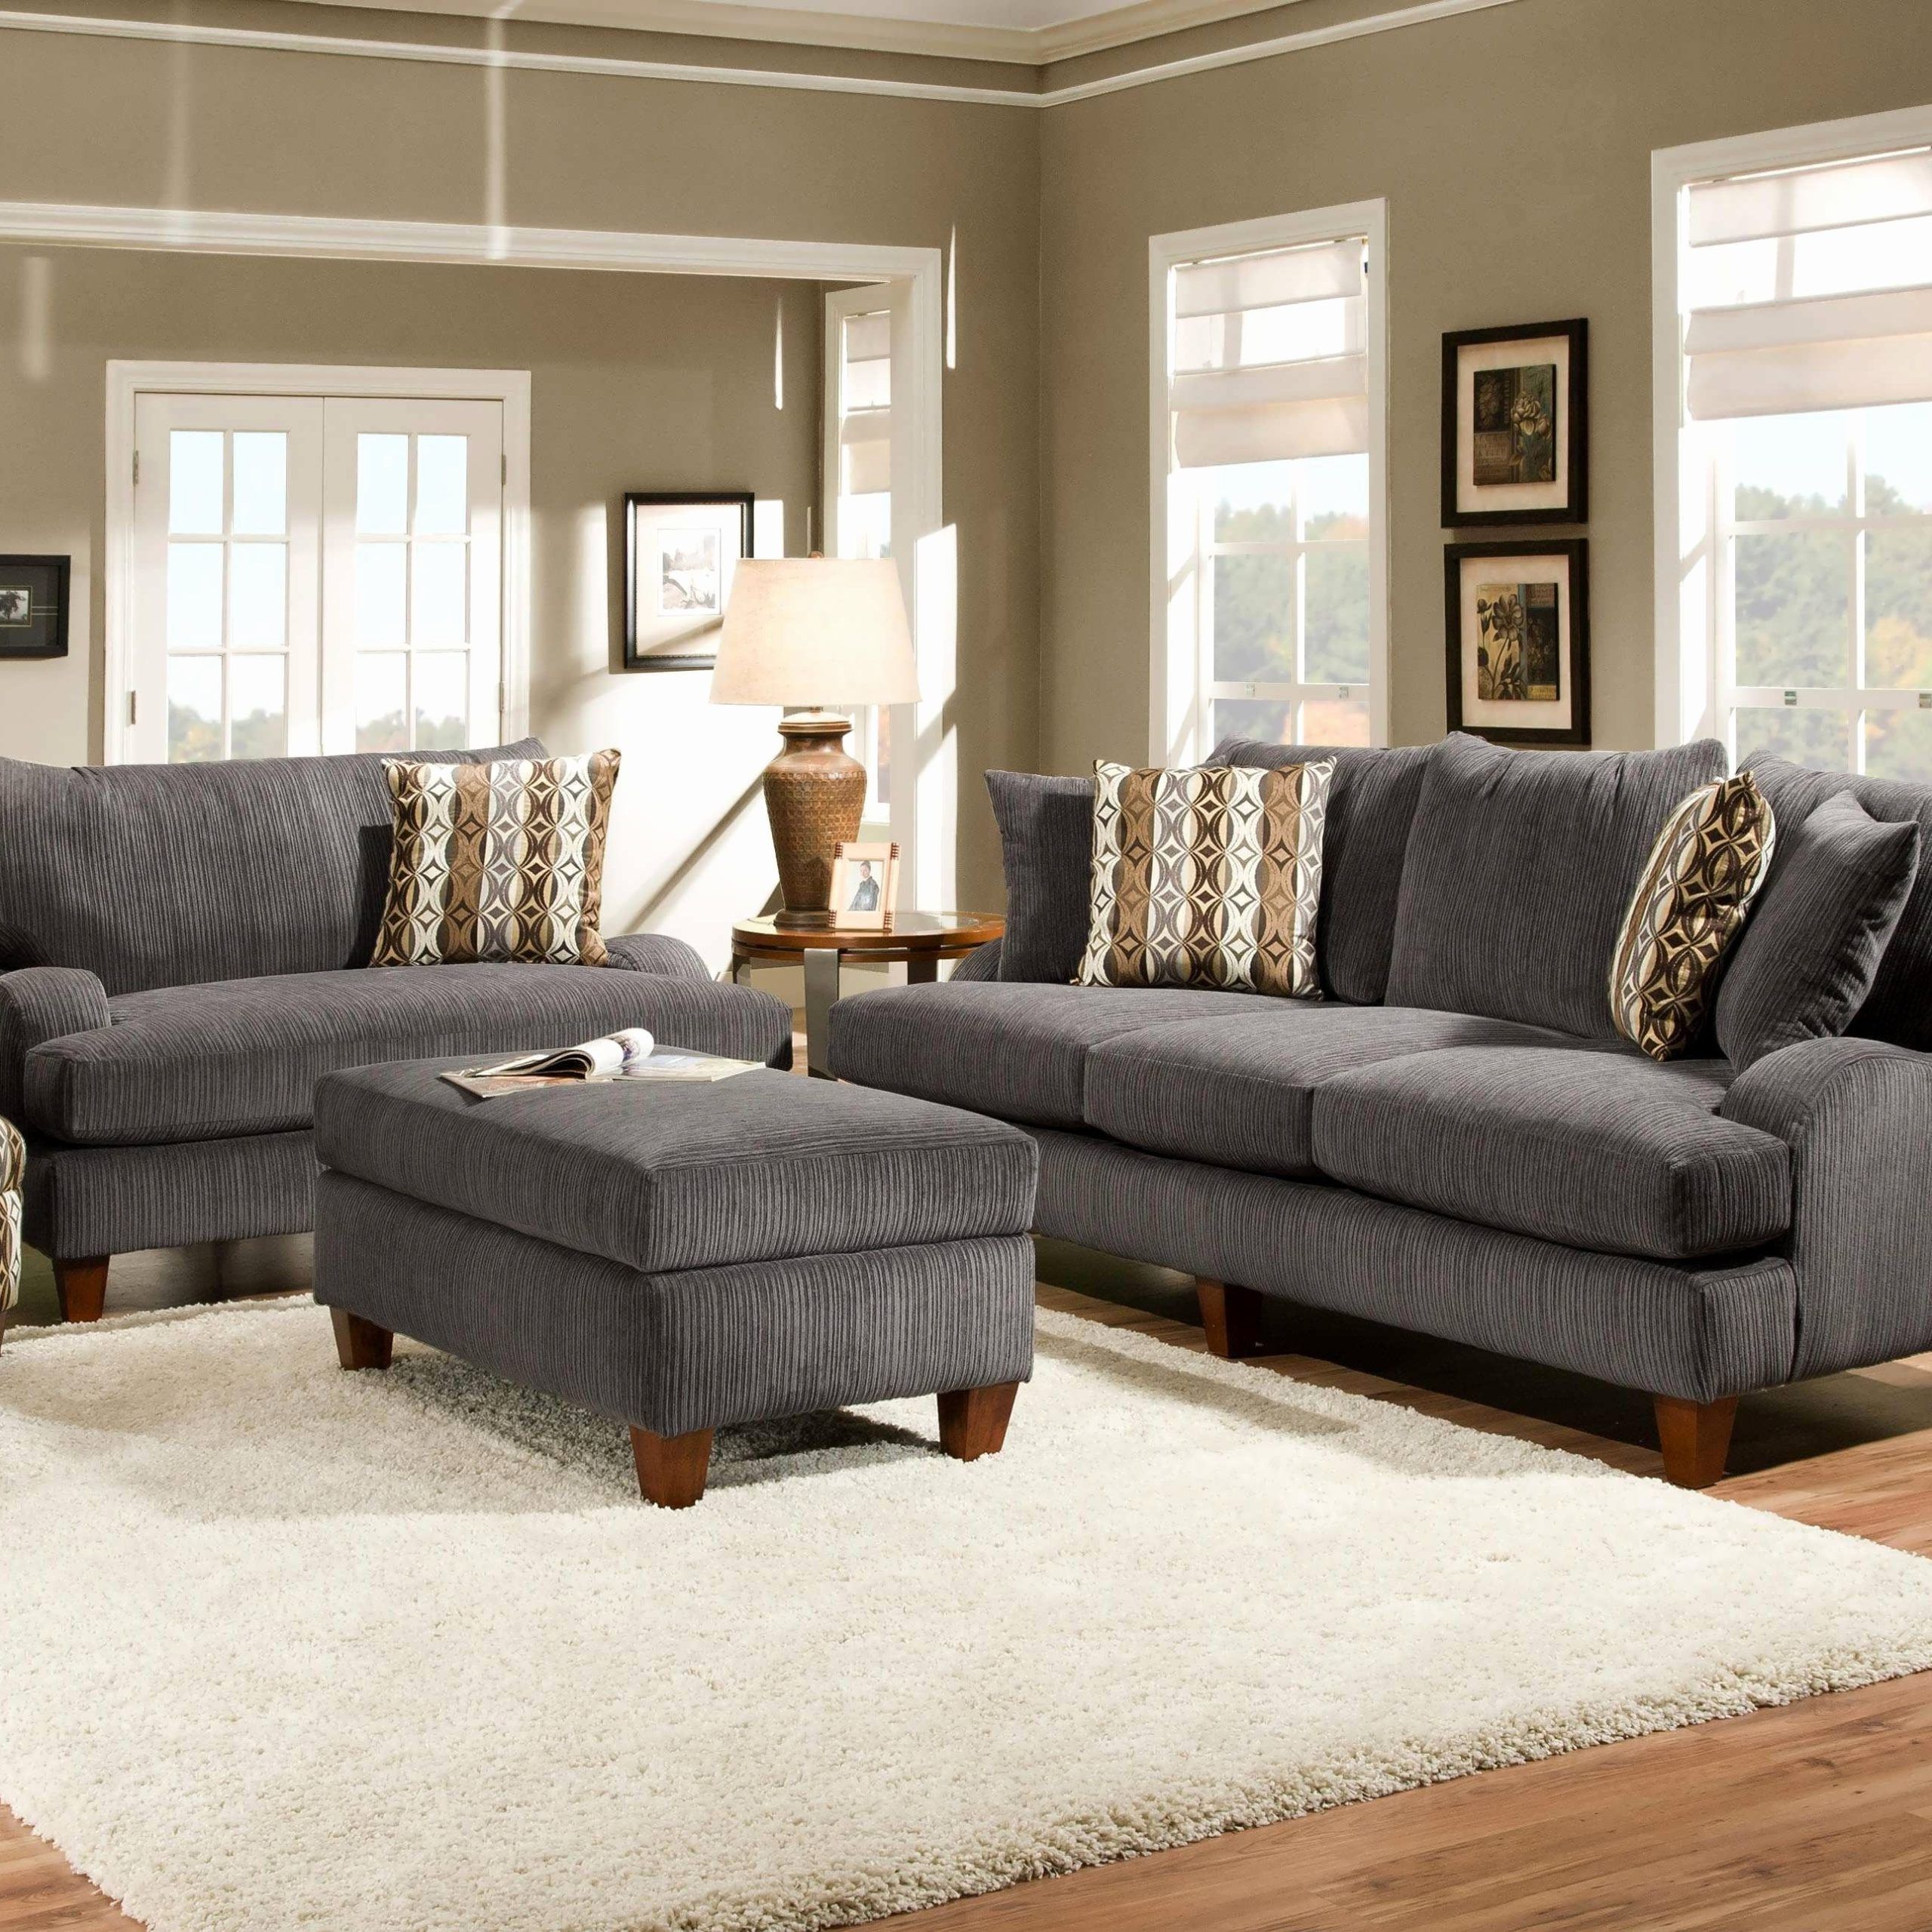 What Color Wood Goes With Gray Couch – Img Stache Intended For Trendy Sofas In Dark Gray (View 15 of 15)